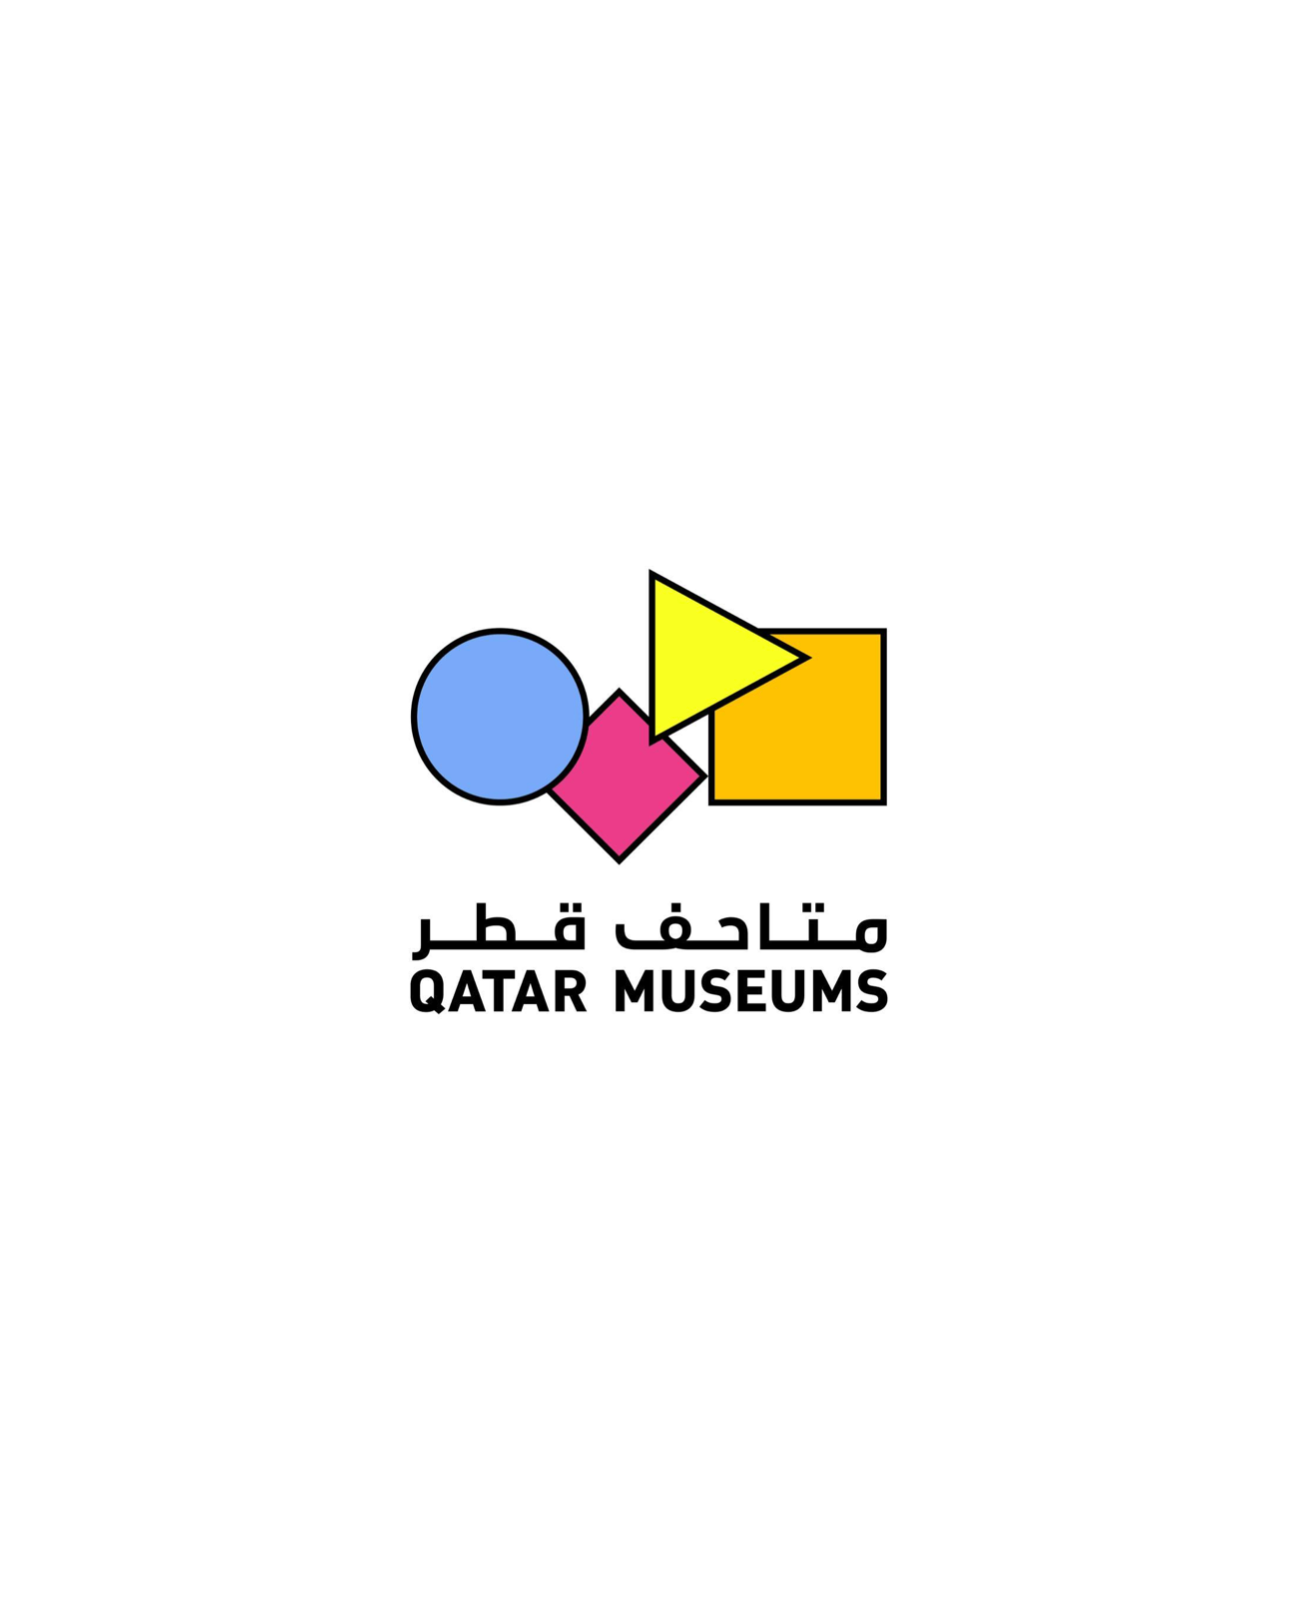 Qatar Museums Logo with the name in English and Arabic below a design of multicoloured shapes (squares, circle and triangle).Qatar Museums Logo with the name in English and Arabic below a design of multicoloured shapes (squares, circle and triangle).